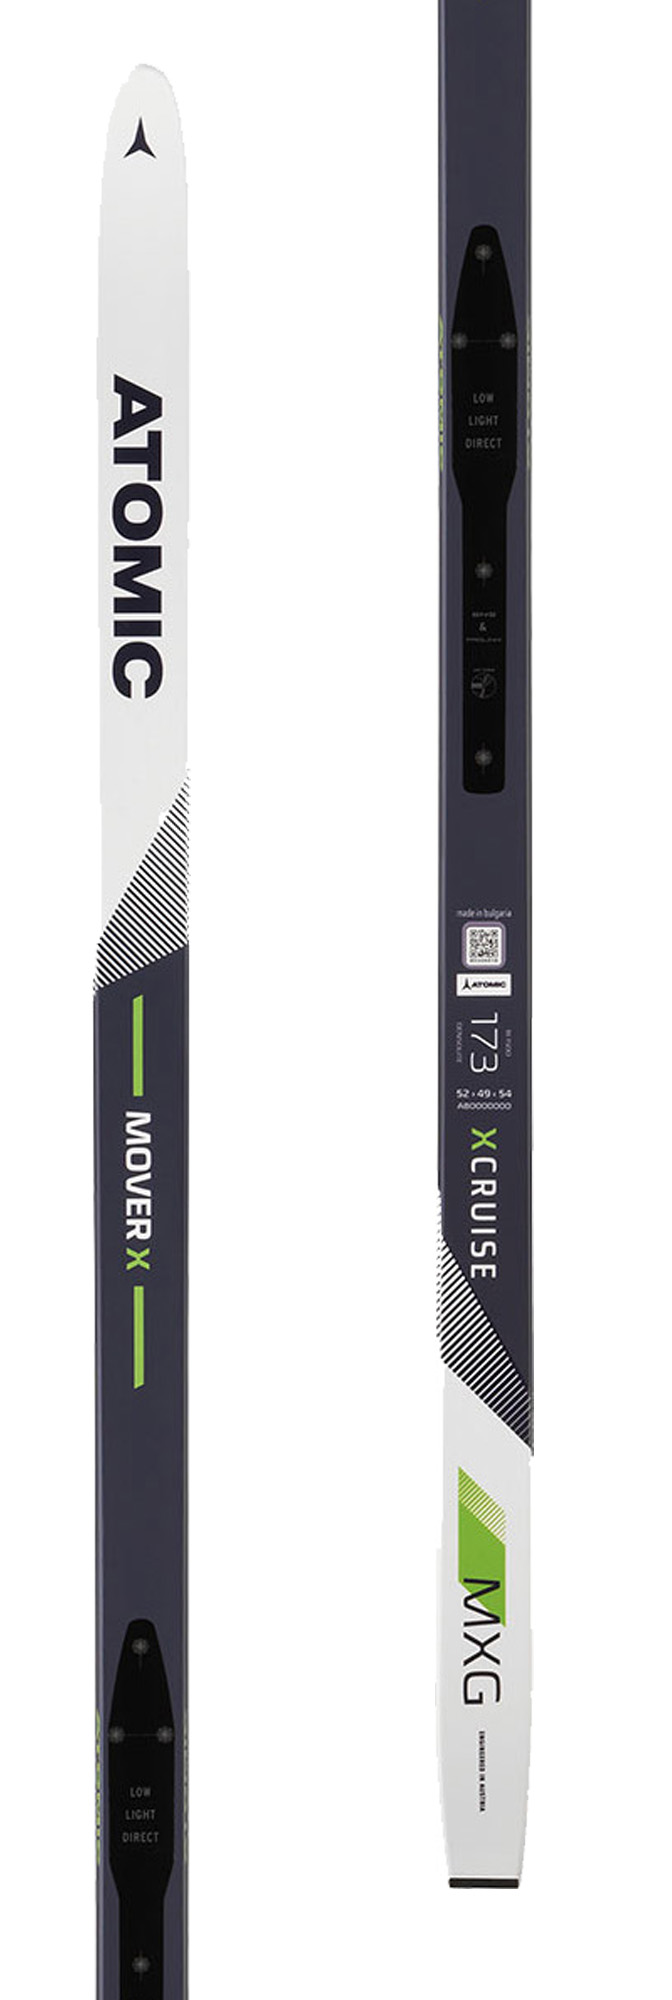 Atomic Mover XCruise Grip L nordic skis with  Prolink Access bindings